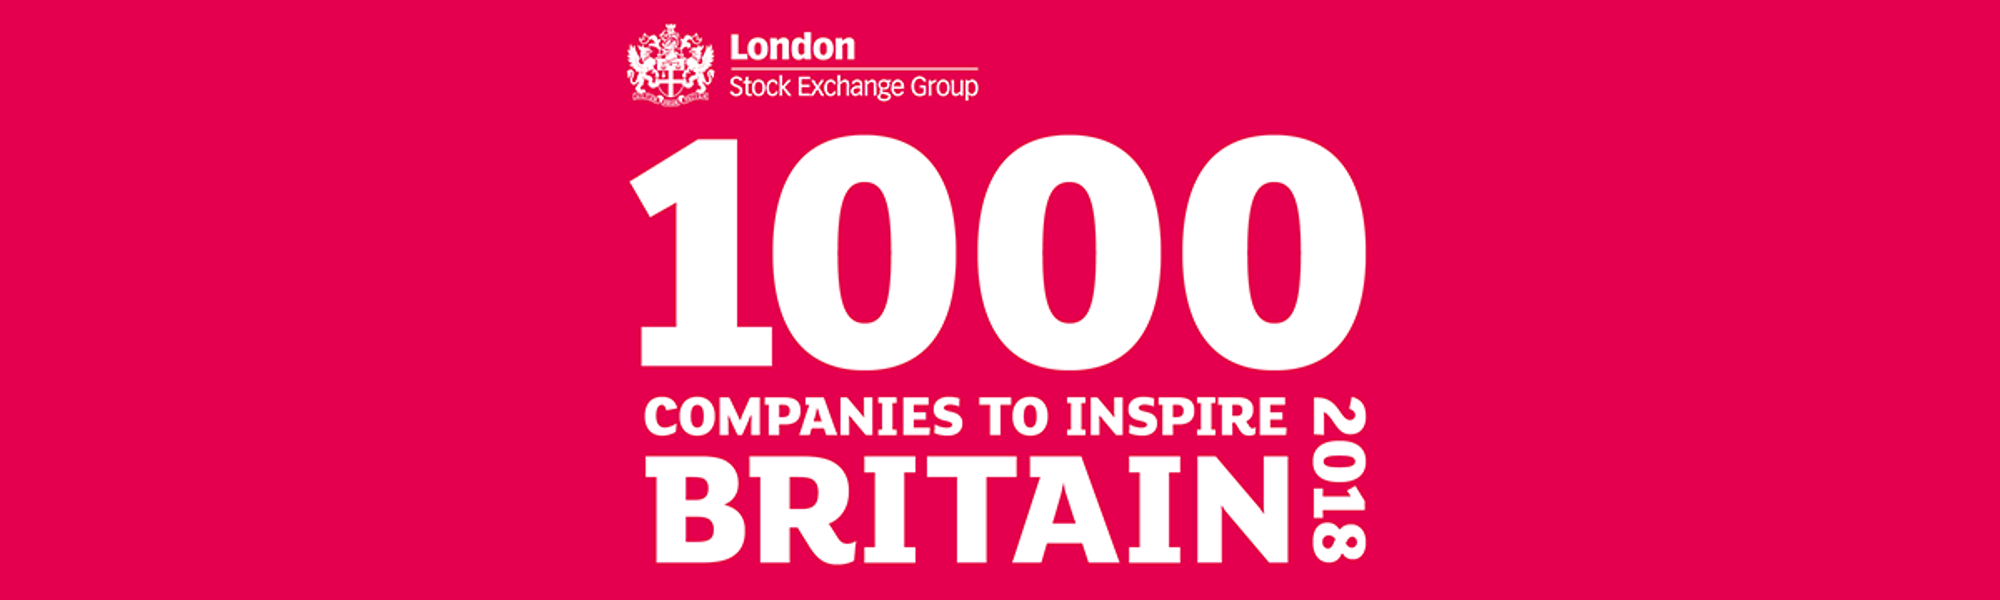 London Stock Exchange Group’s 1000 Companies To Inspire Britain In 2018